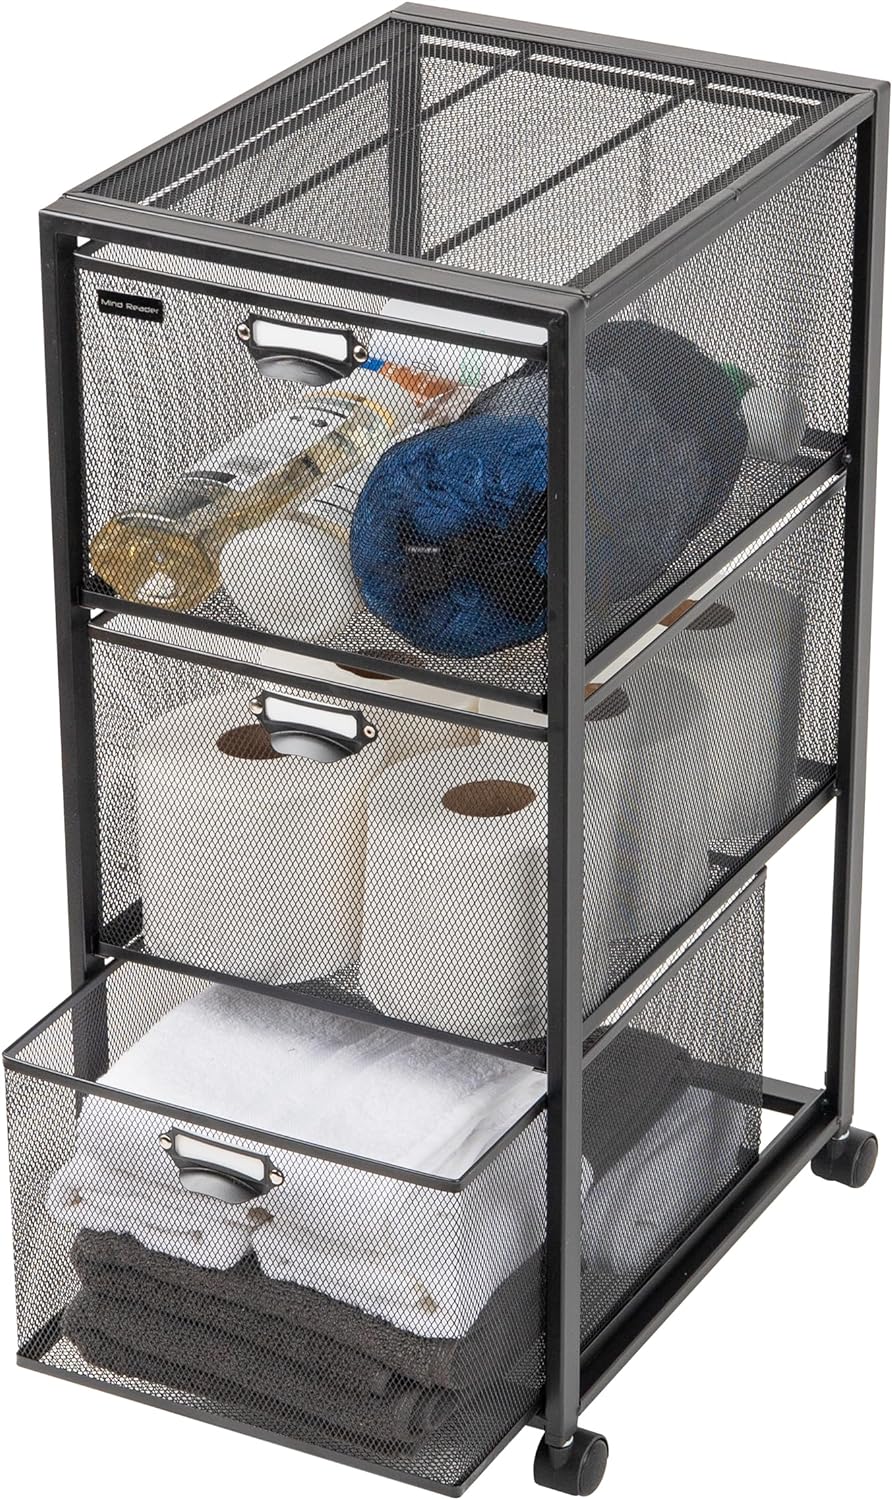 https://bigbigmart.com/wp-content/uploads/2023/09/Mind-Reader-Network-Collection-Rolling-FIle-Cabinet-with-3-Removable-Drawers-Omnidirectional-Wheels-Desk-Organizer-Lightweight-and-Portable-Metal-Mesh-11L-x-14W-x-25H-Black7.jpg